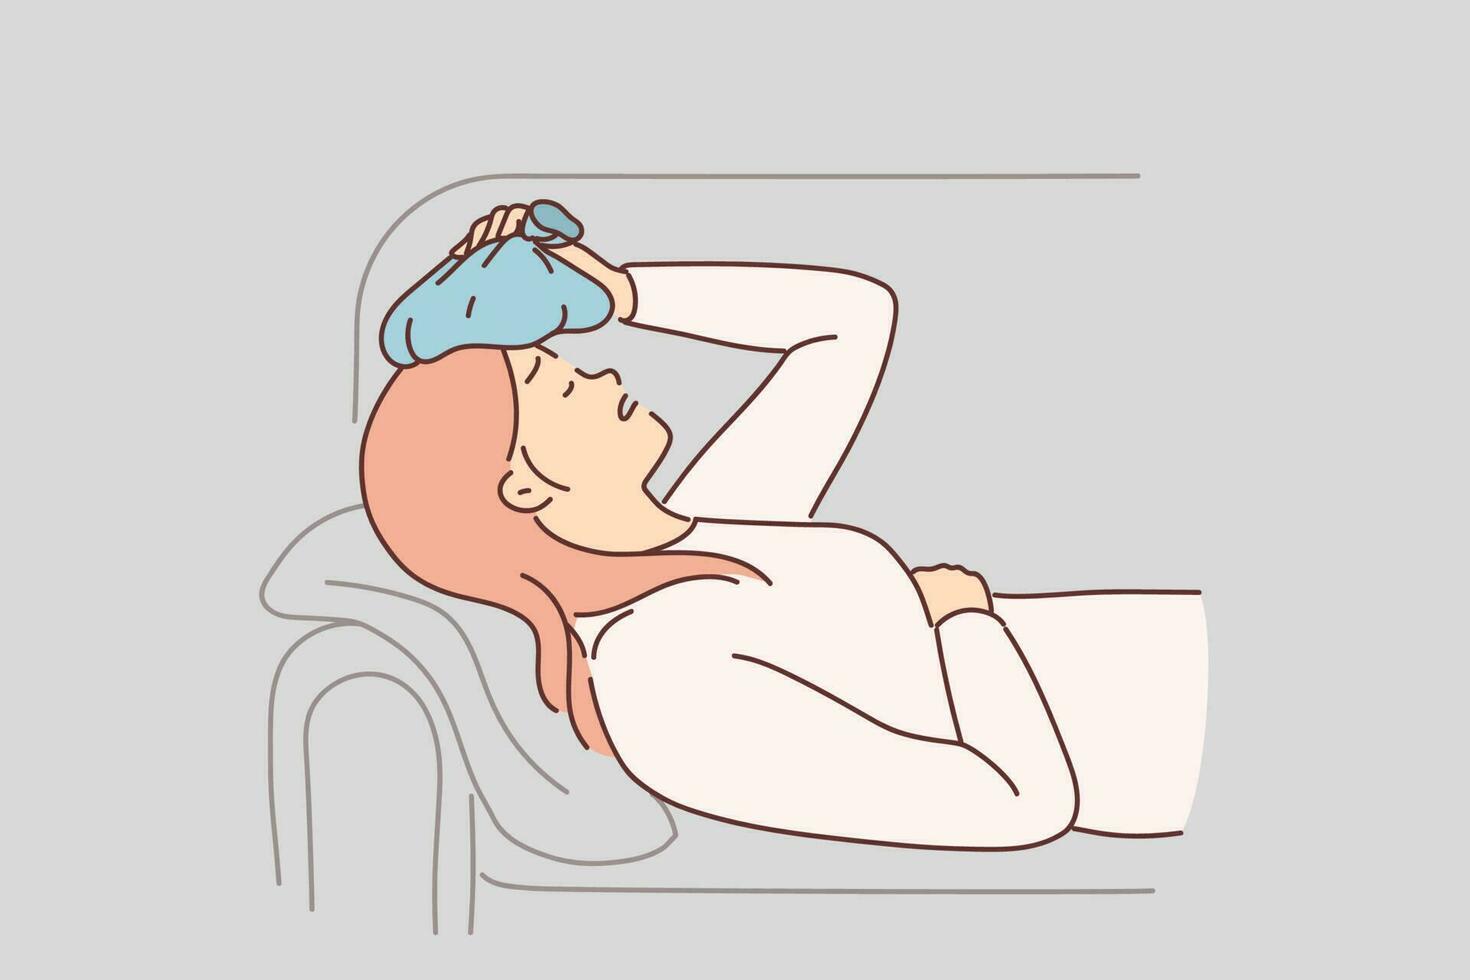 Woman suffers from hangover and puts ice pack on head to get rid of headache after alcohol party. Girl with hangover due to alcohol abuse and drinking lies on couch in need of headache pills vector